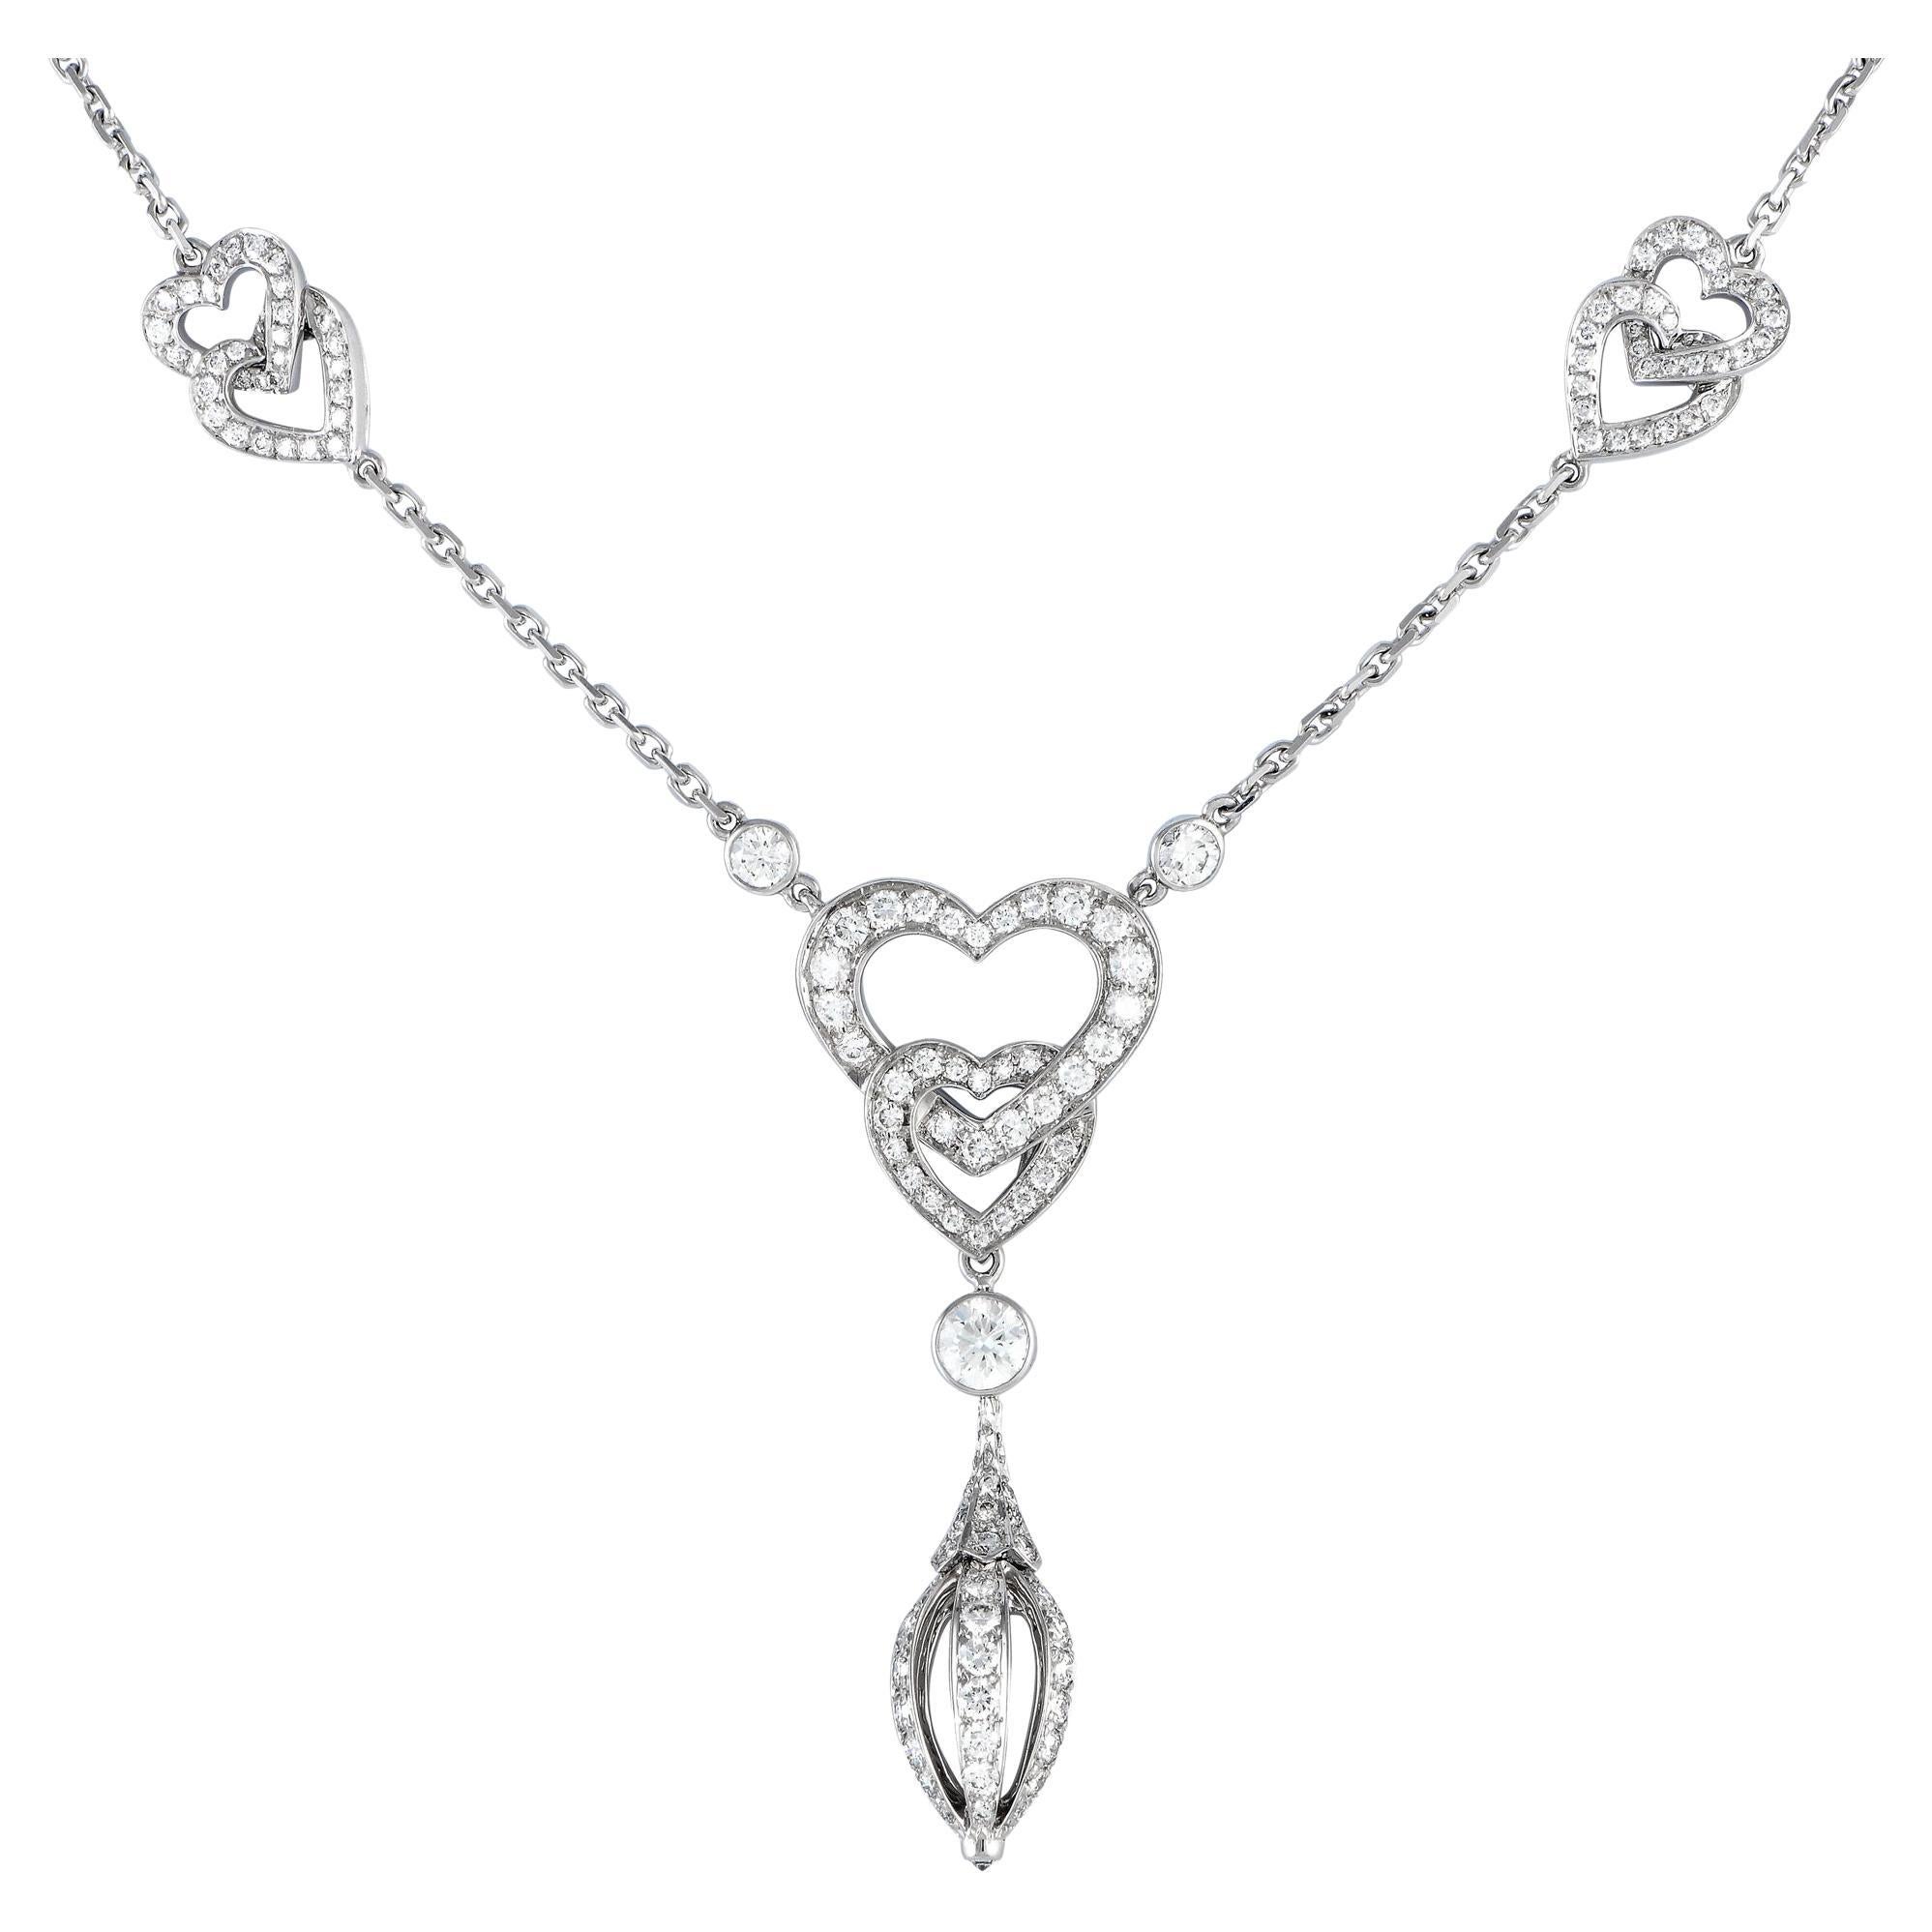 Cartier 18K White Gold 1.85ct Diamond Heart Necklace CA09-100623 For Sale